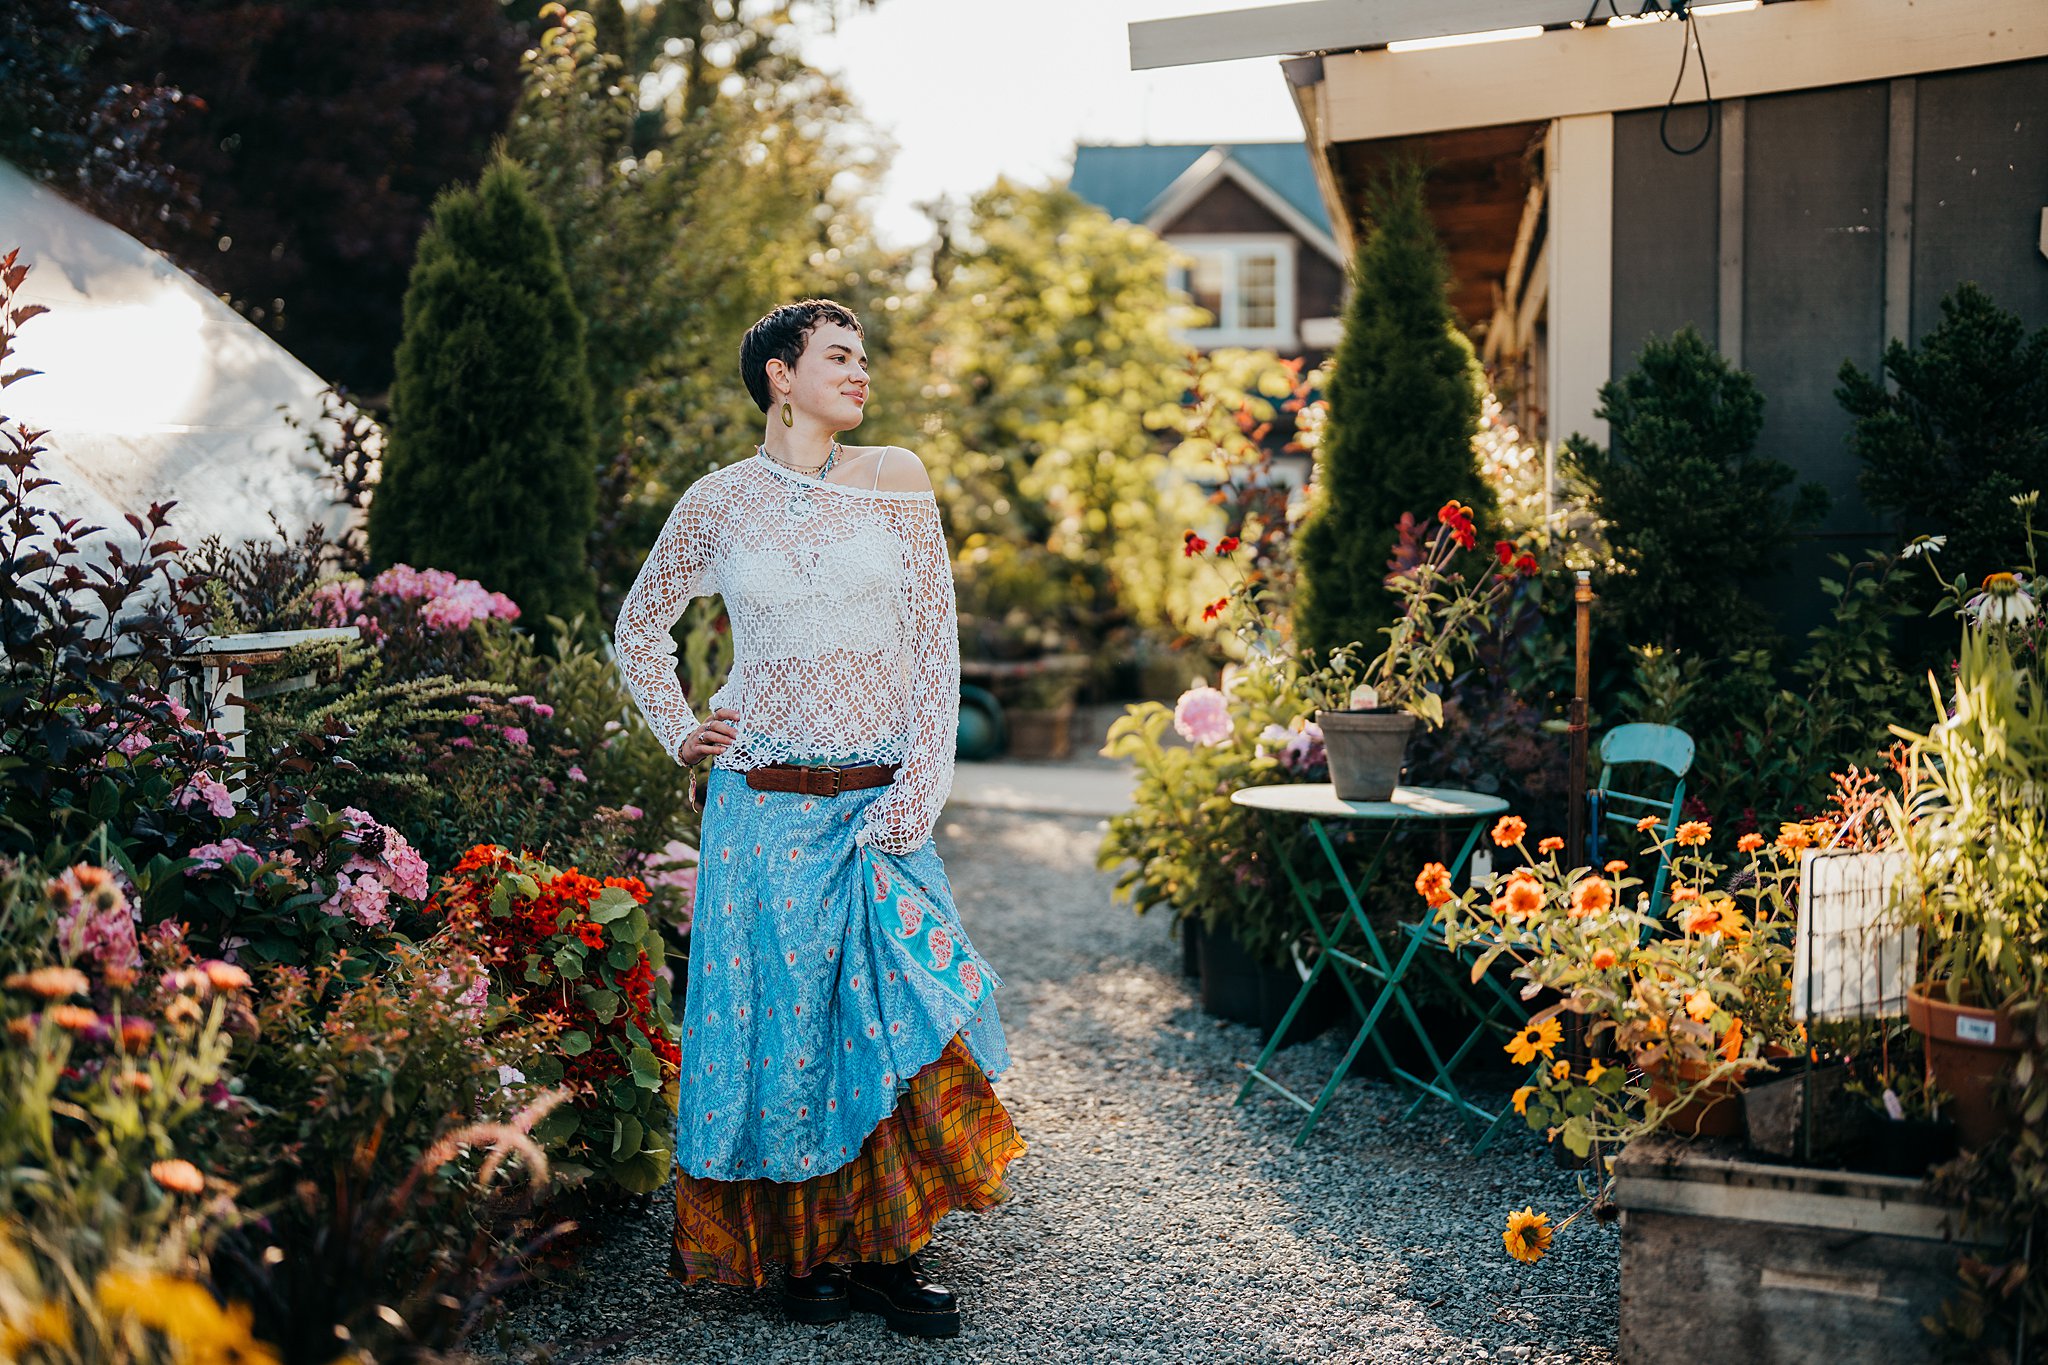 A woman in a white top and colorful skirt stands in a garden path surrounded by flowers while holding her skirt Seattle Photoshoot Locations